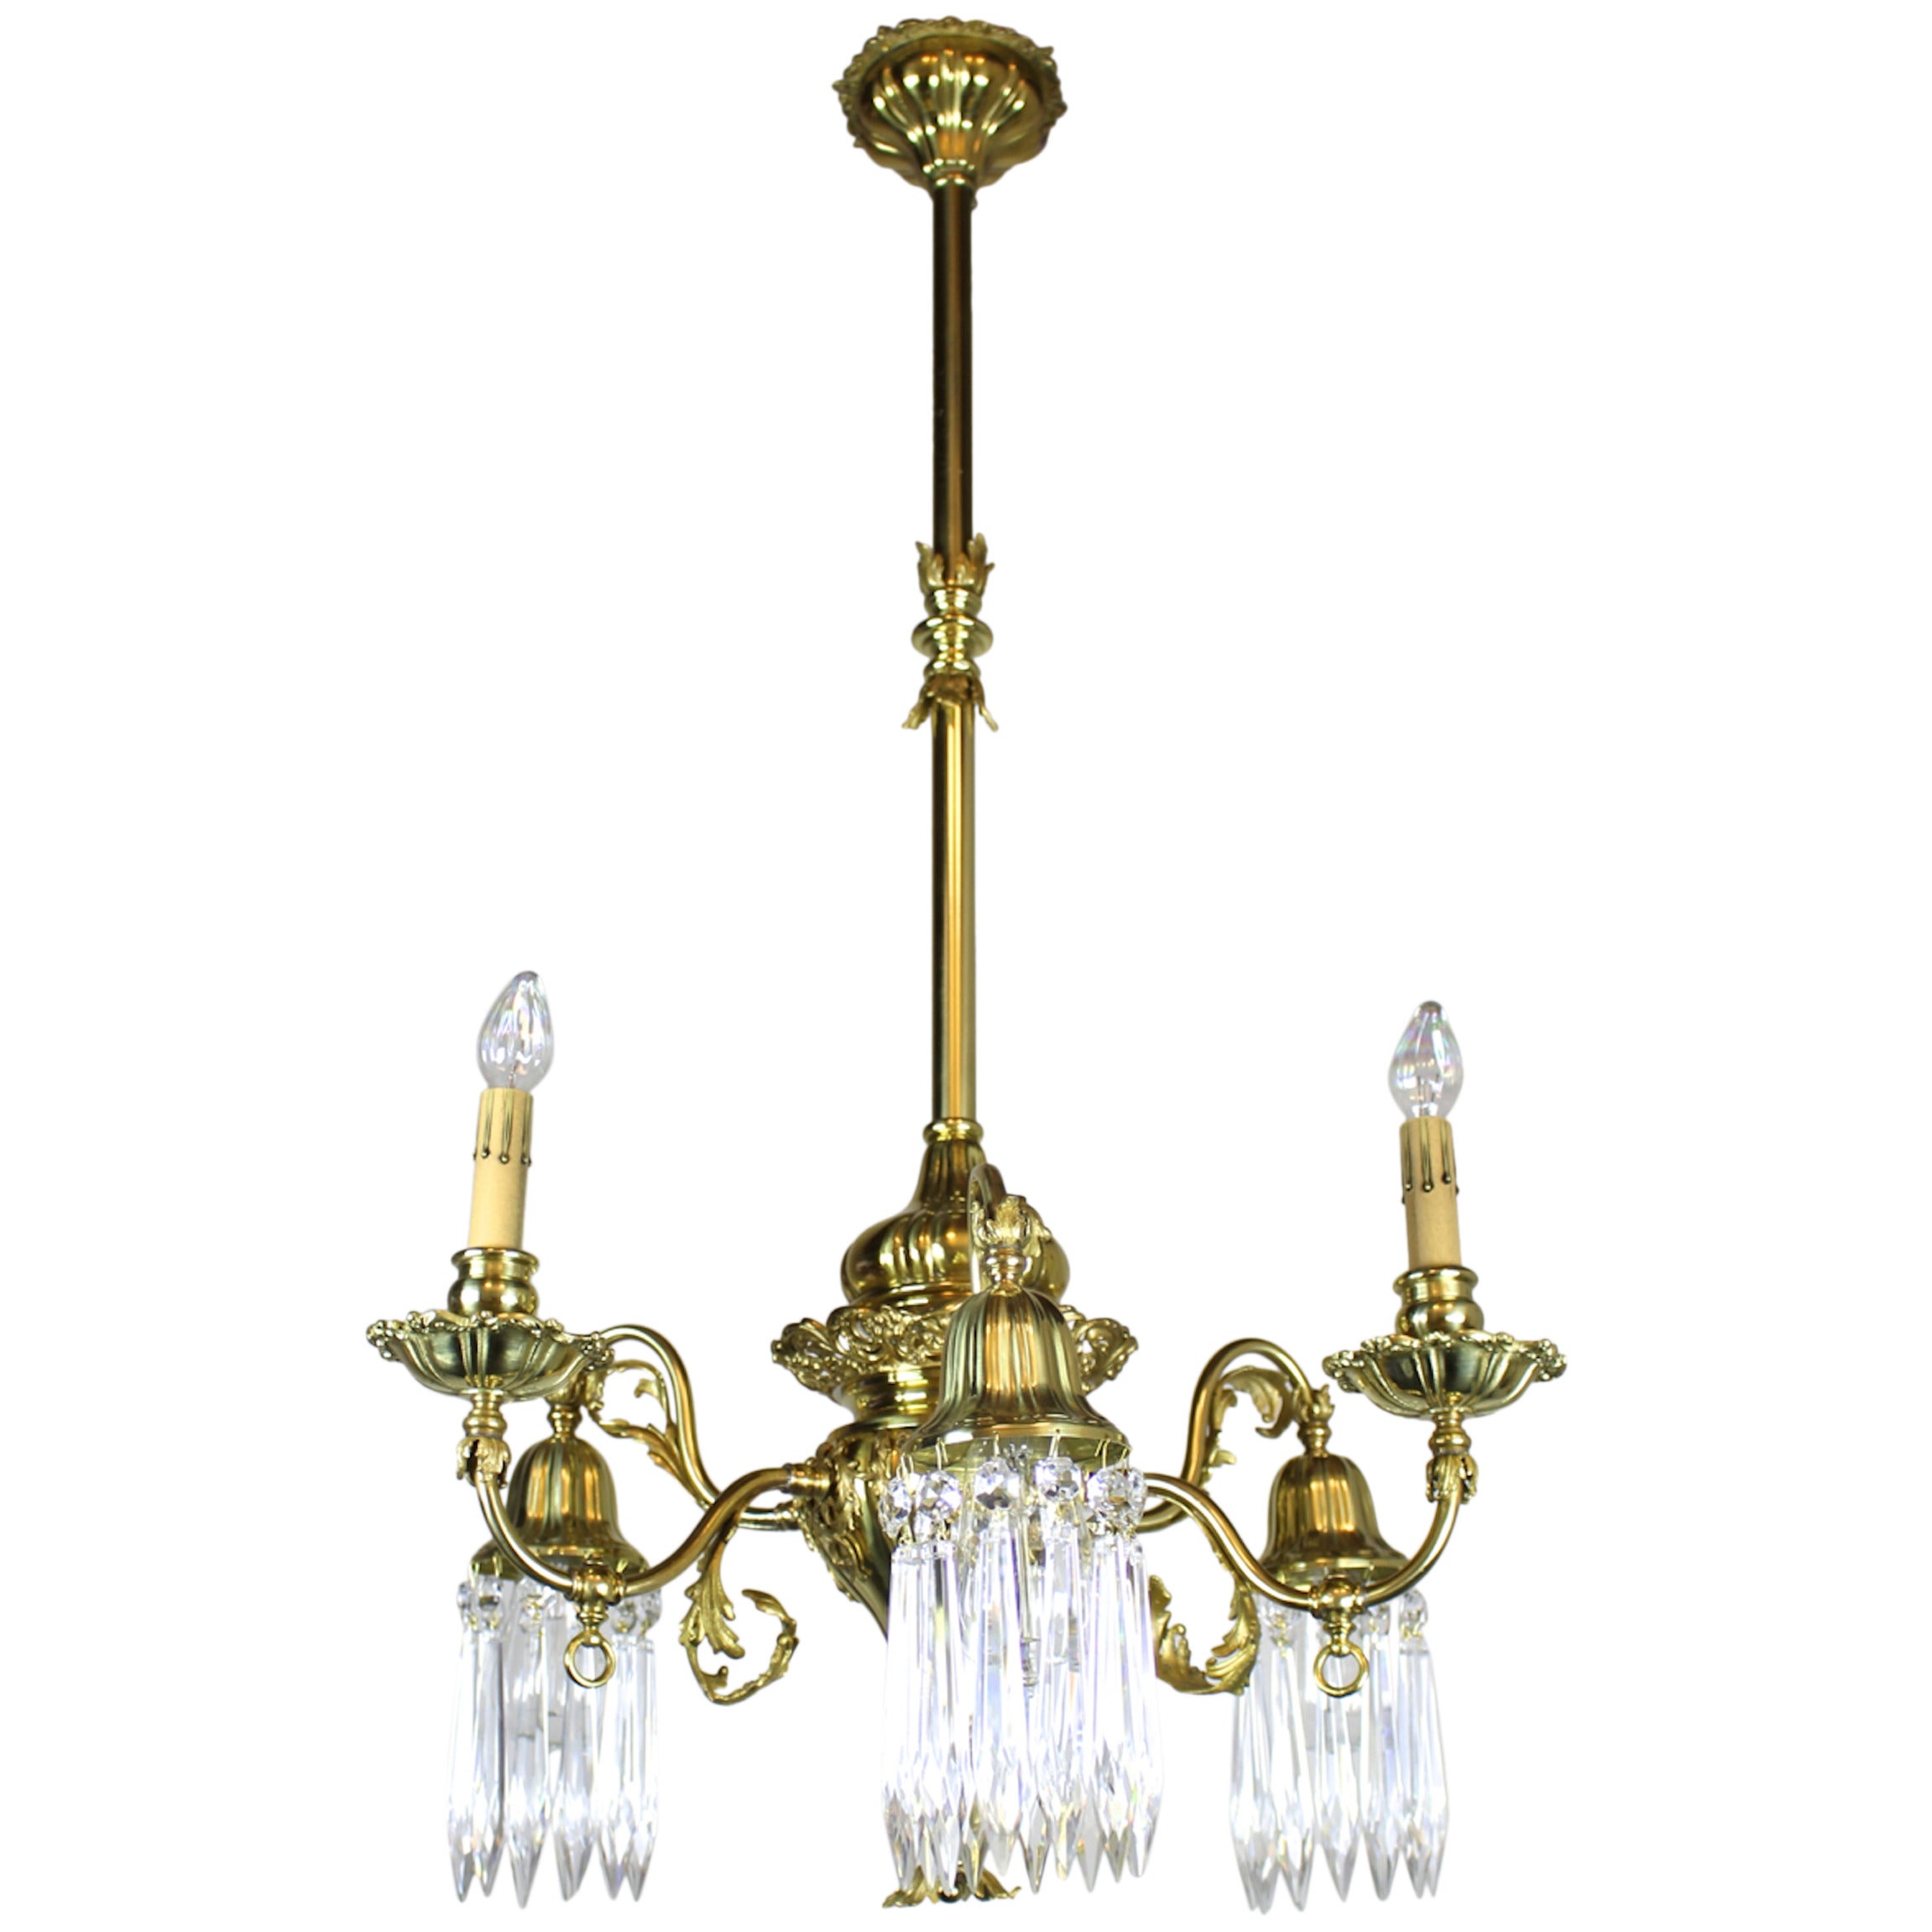 Converted Gas-Electric Decorative Sheffield Style Chandelier For Sale